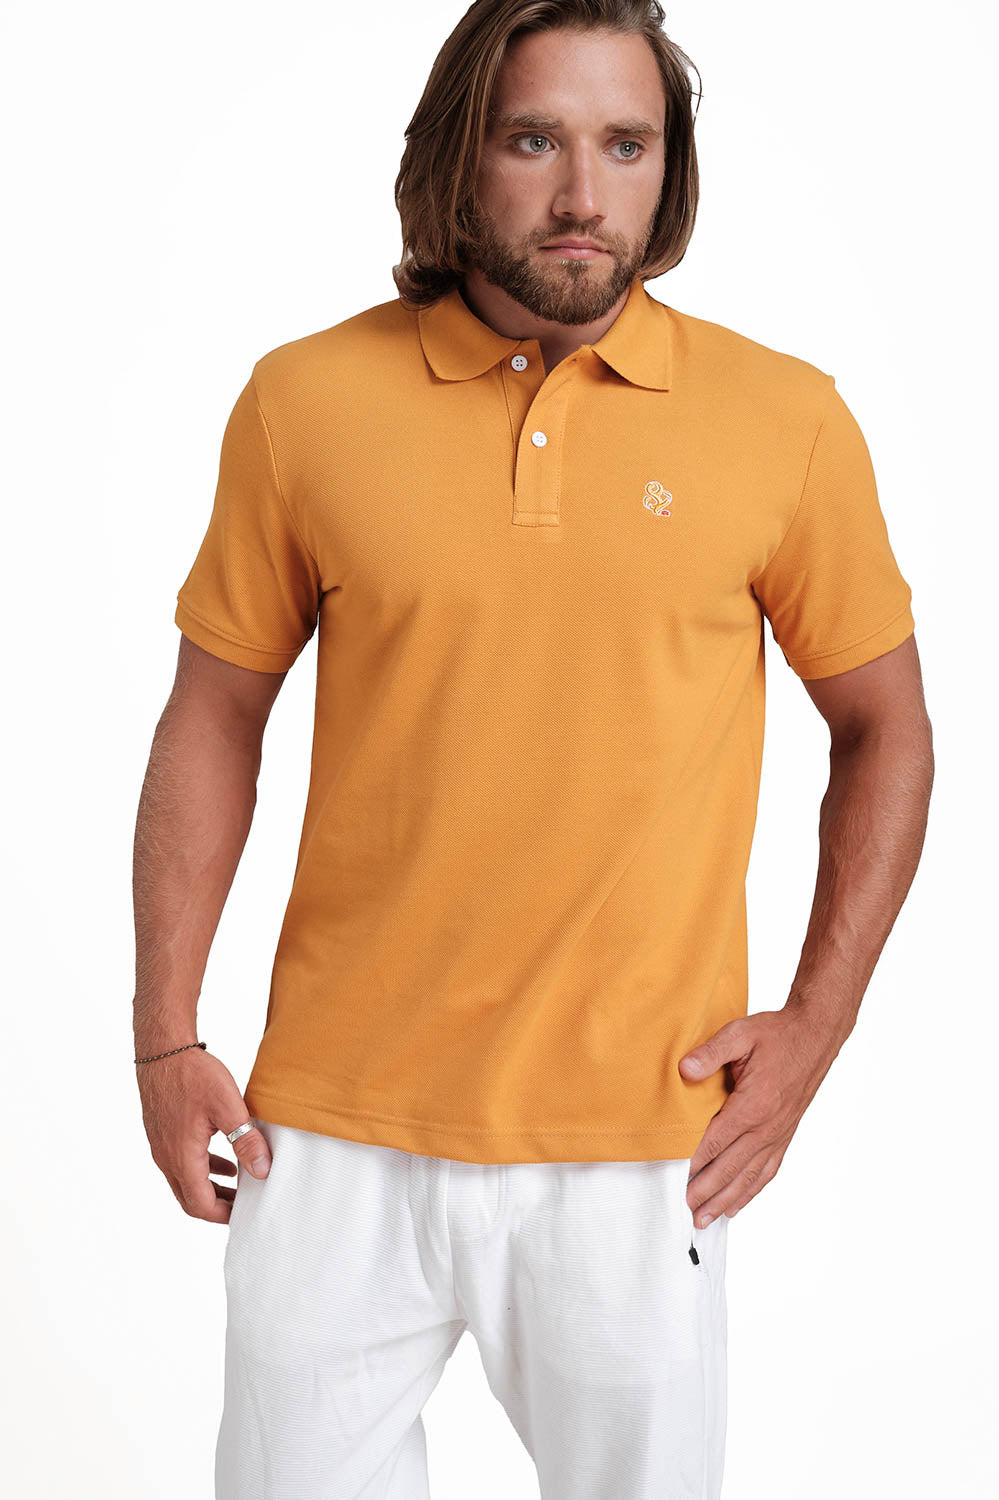 Polo Gold T-Shirts With Front Embroidery, Solid Pique Fabric